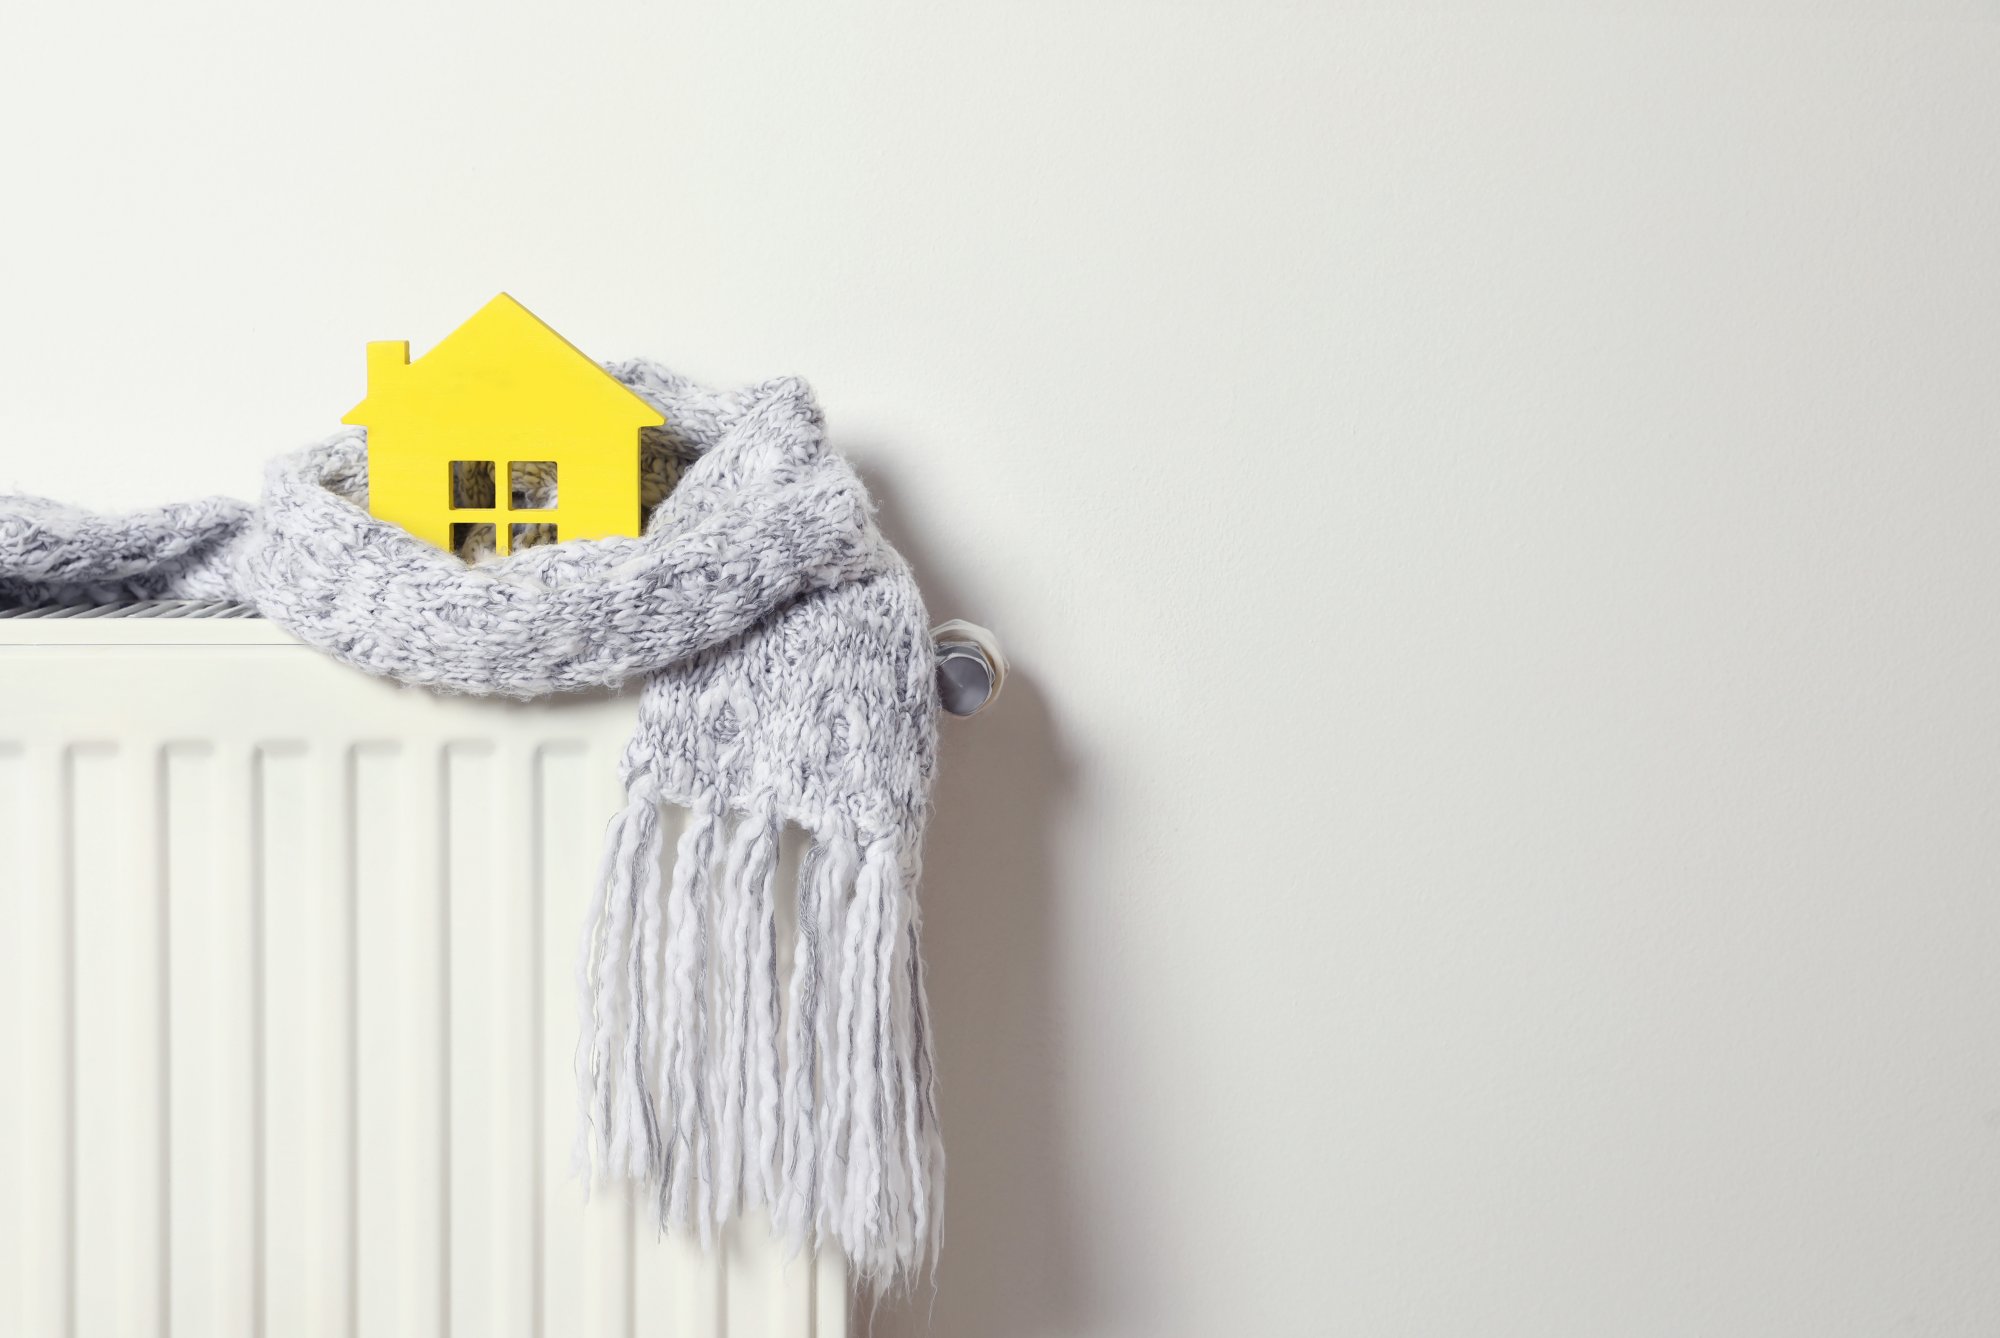 Half of Greek households are unable to keep their homes warm enough